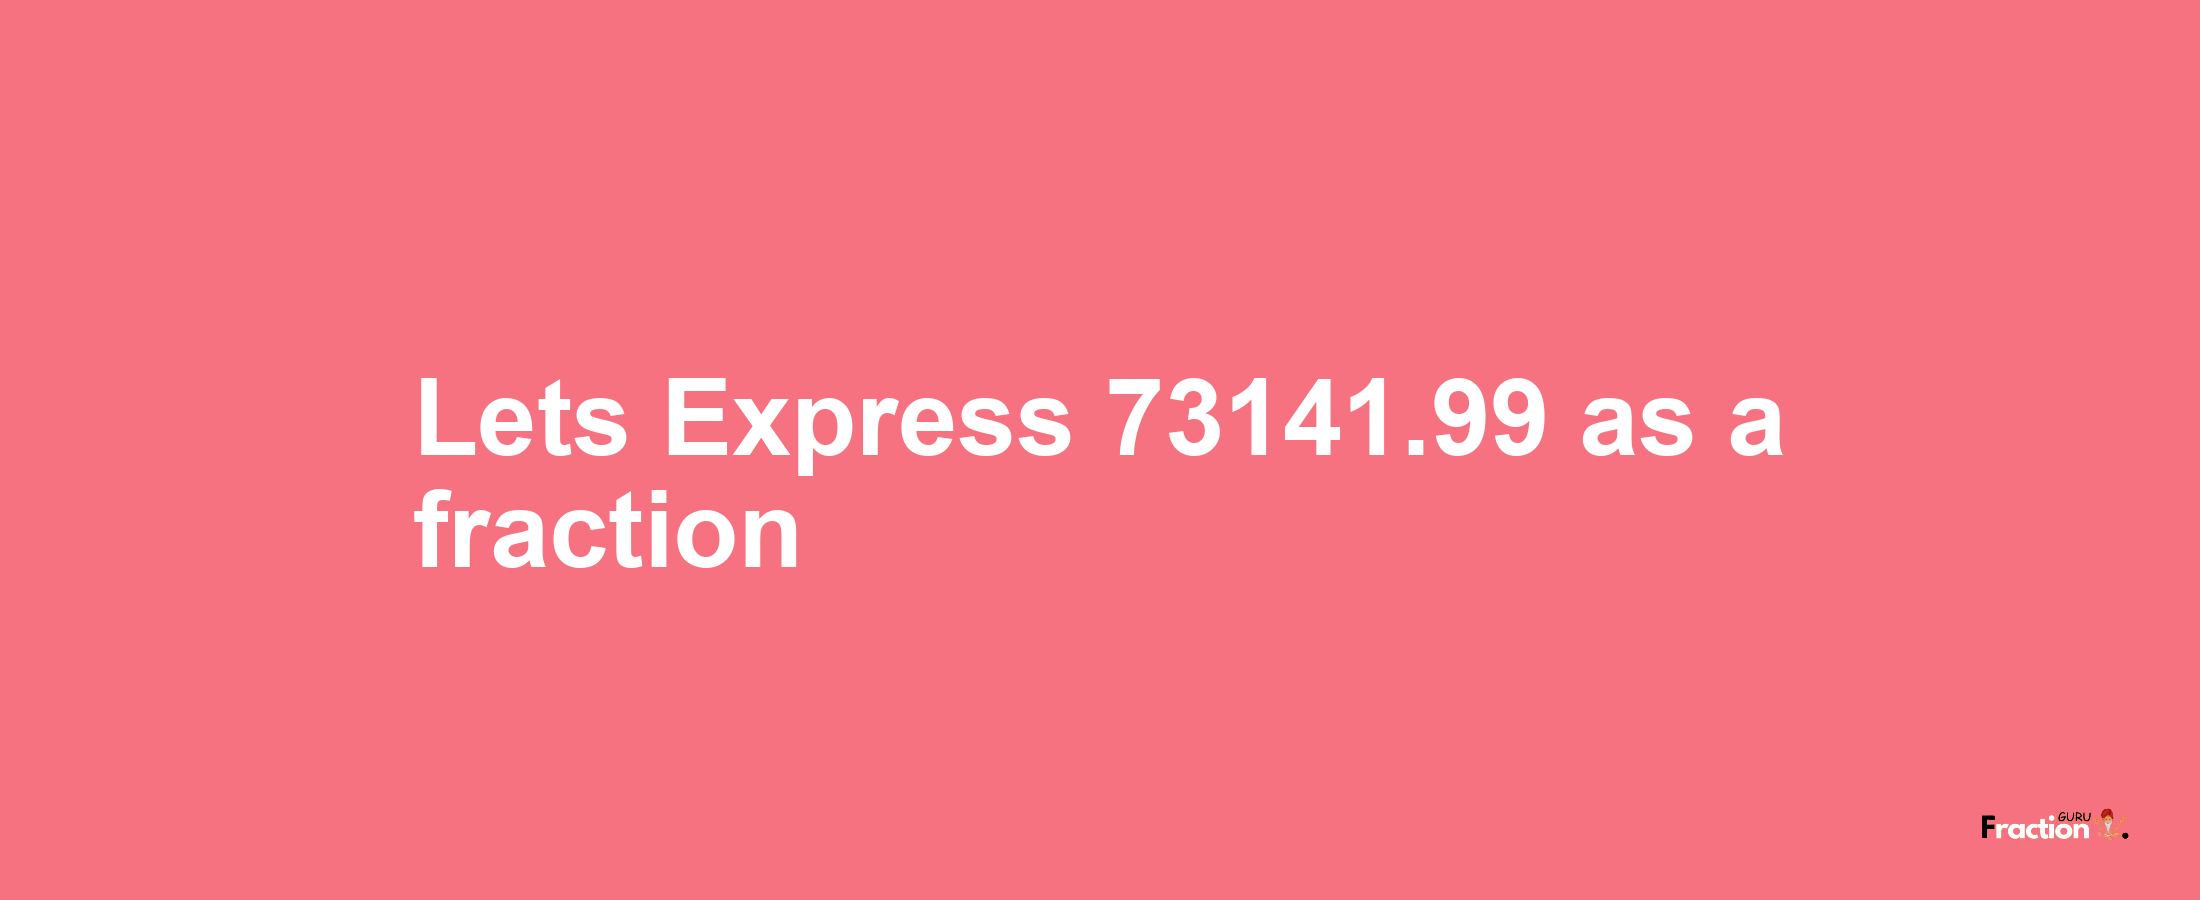 Lets Express 73141.99 as afraction